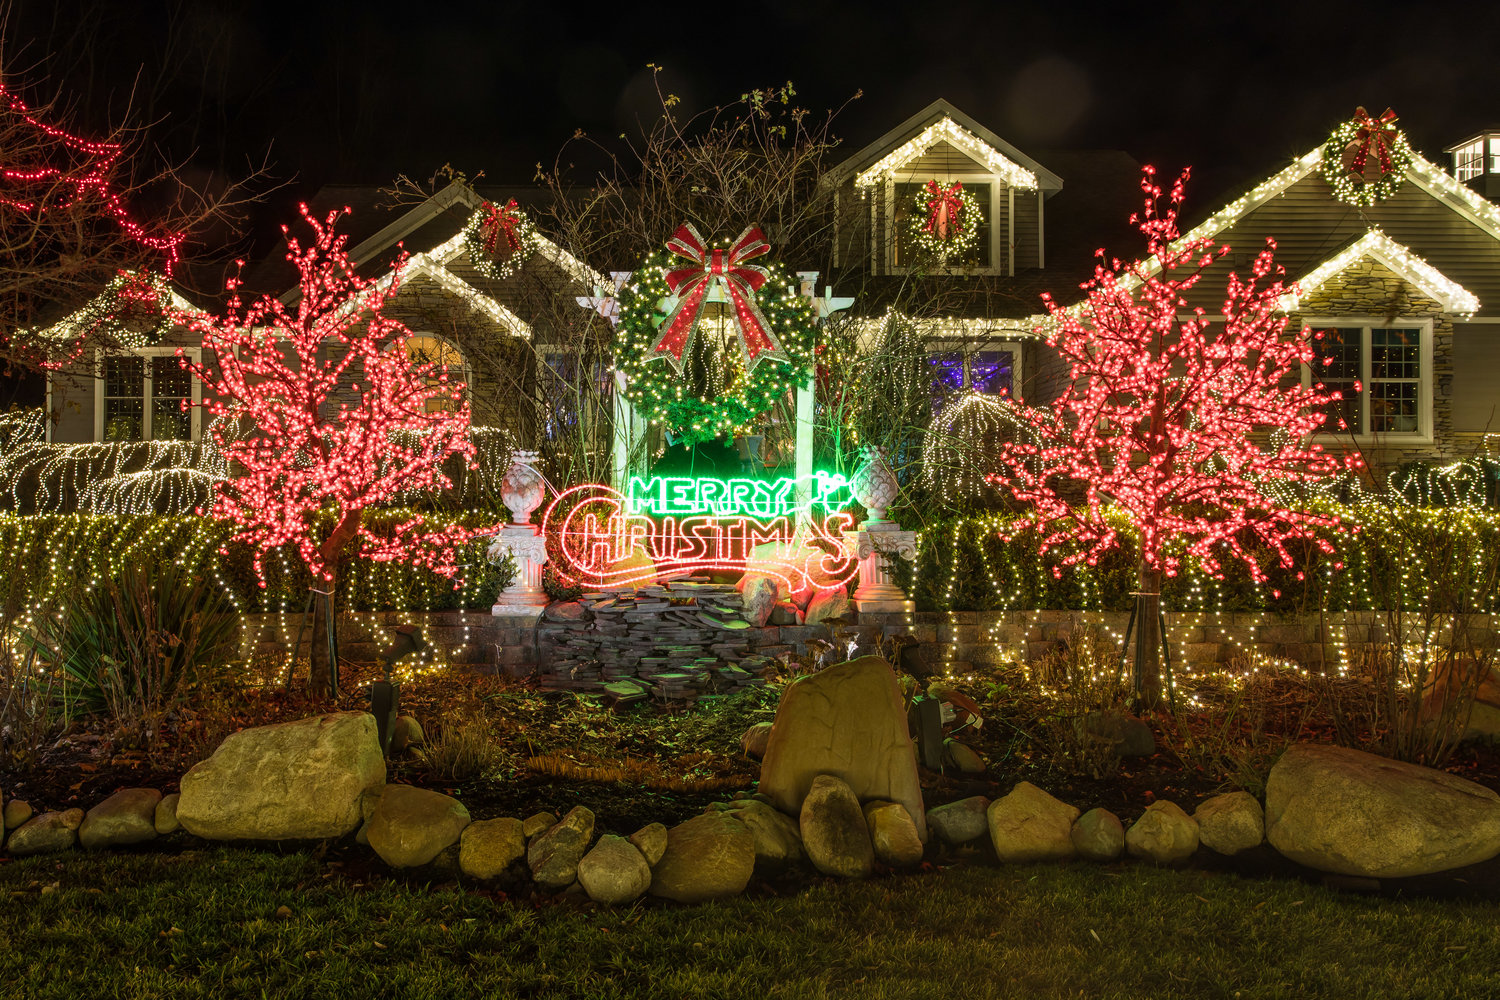 Visible from space?  Cheryl Underwood smiles as she admits her epic Christmas display is “a little over the top”.  It includes more than 150,000 lights and draws hundreds of visitors to Williamstown Township.